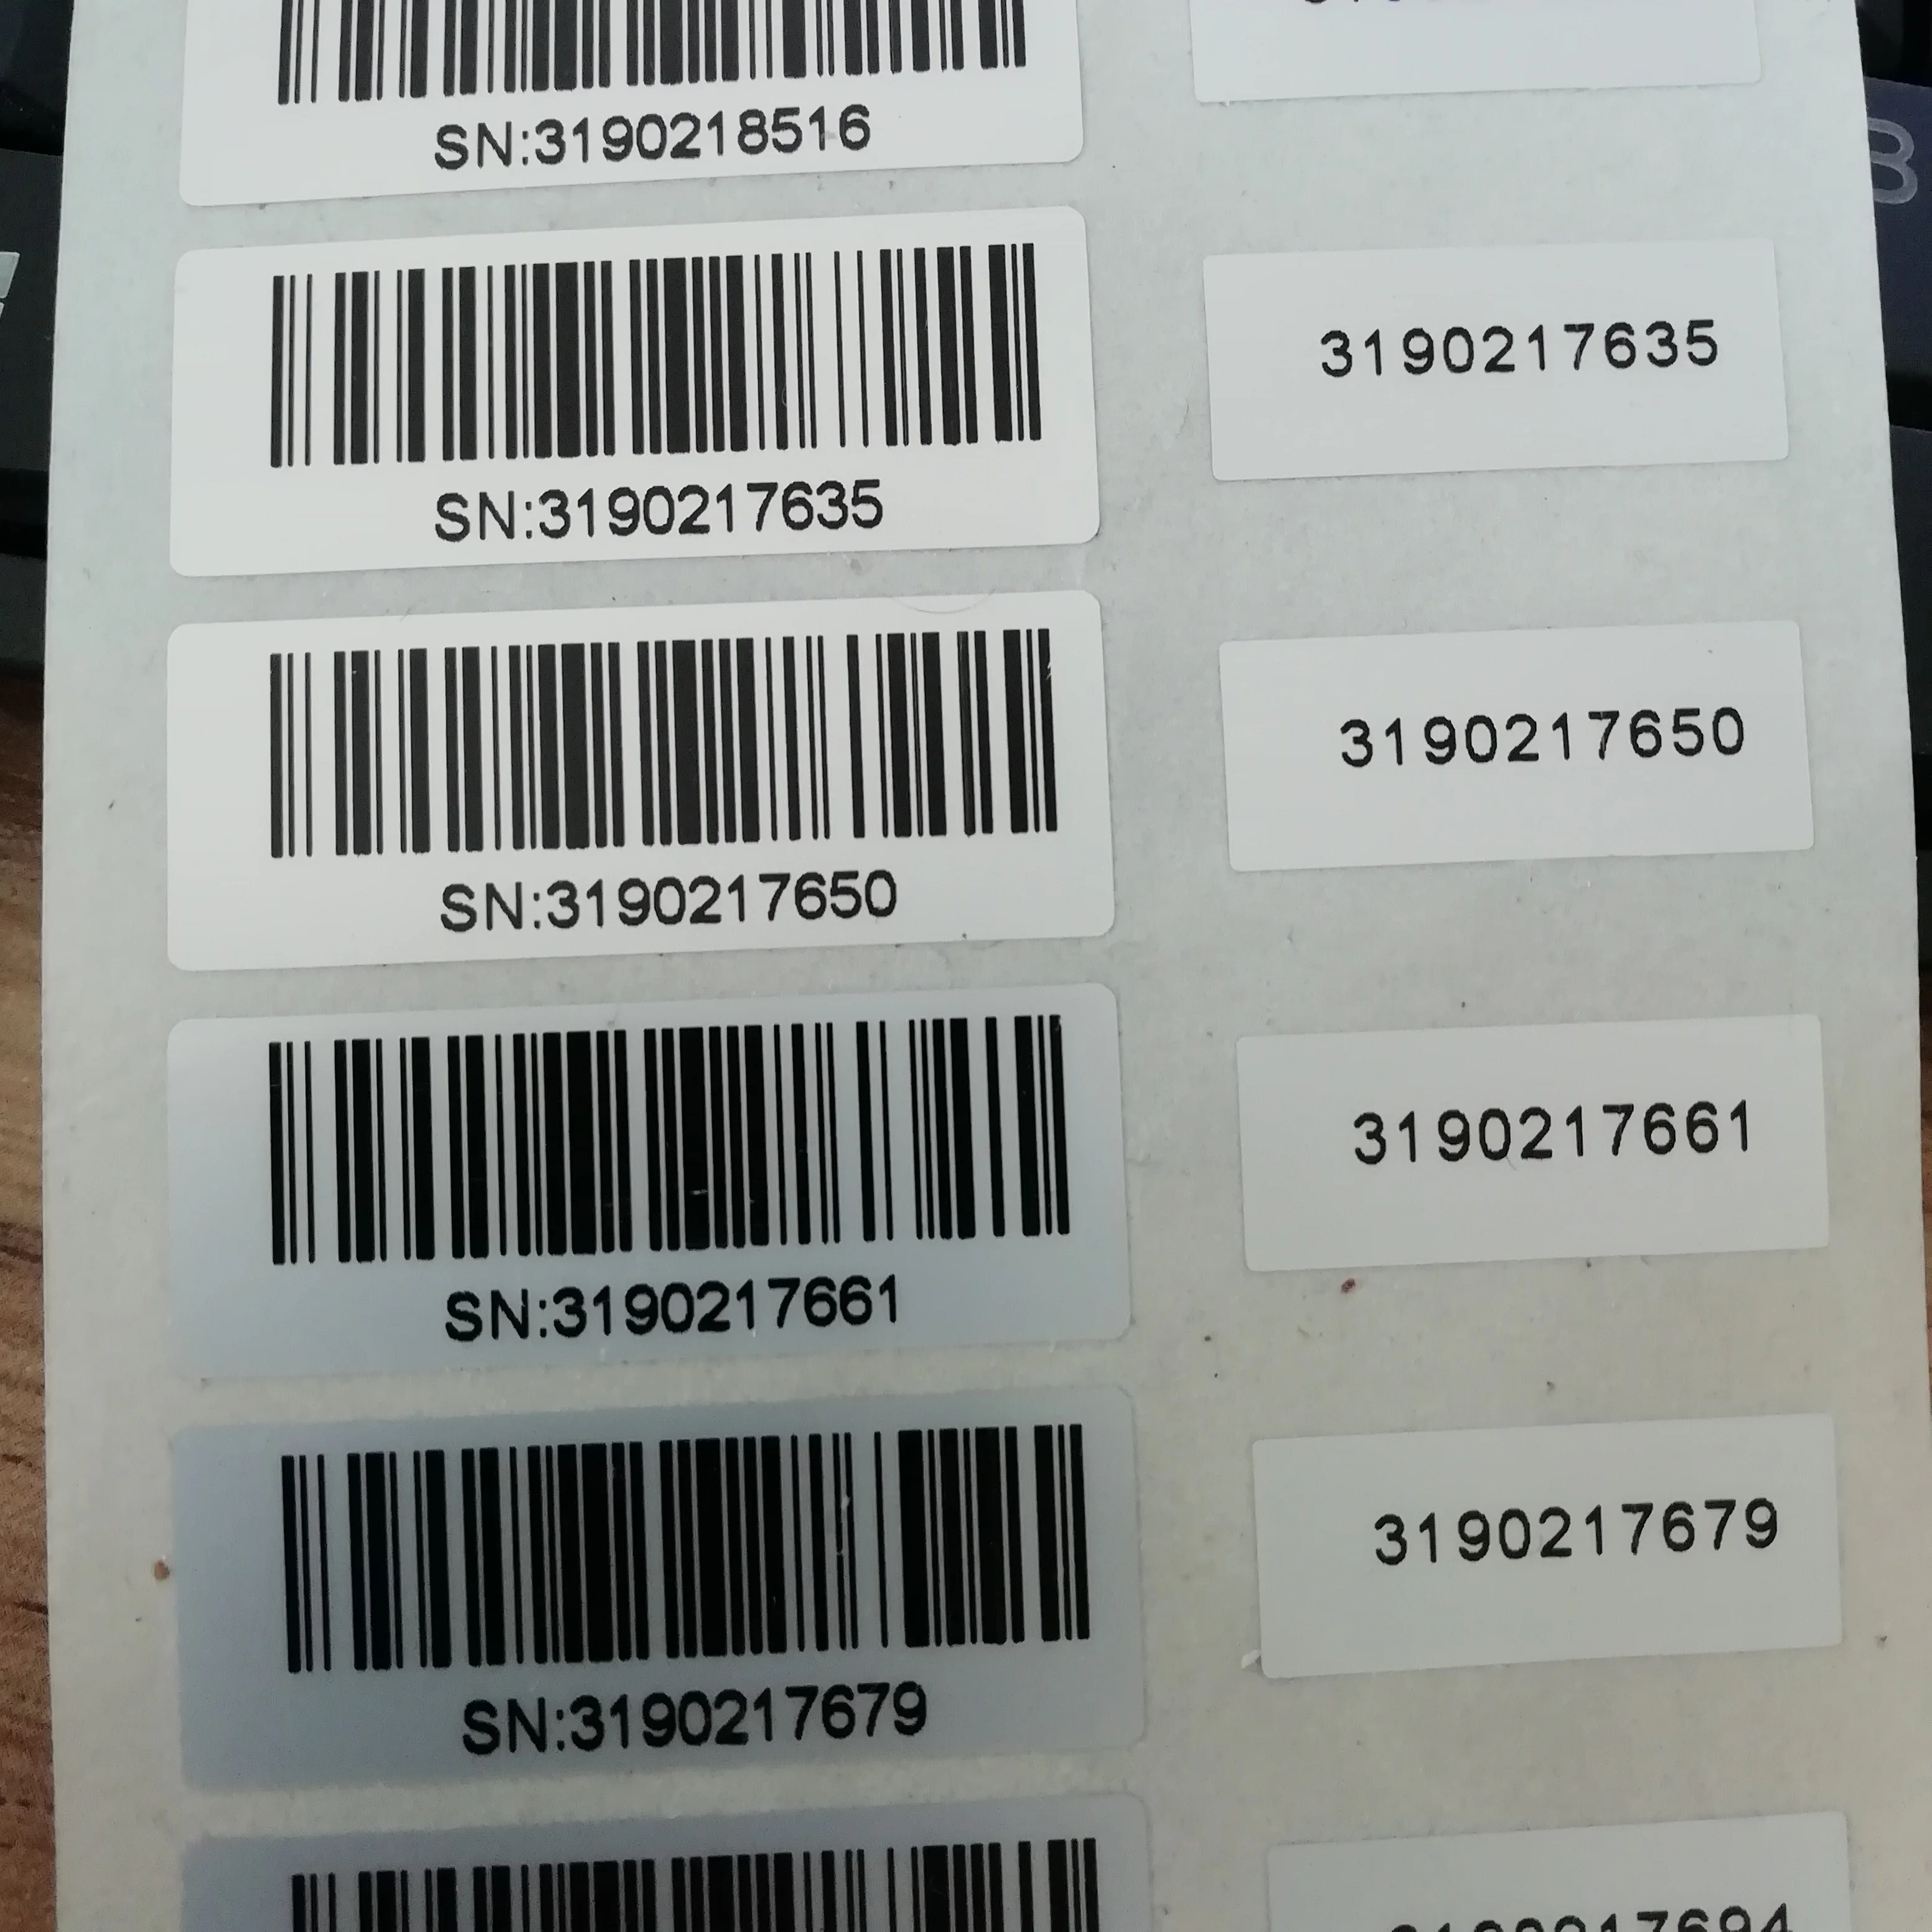 barcode producer 6.2 serial number